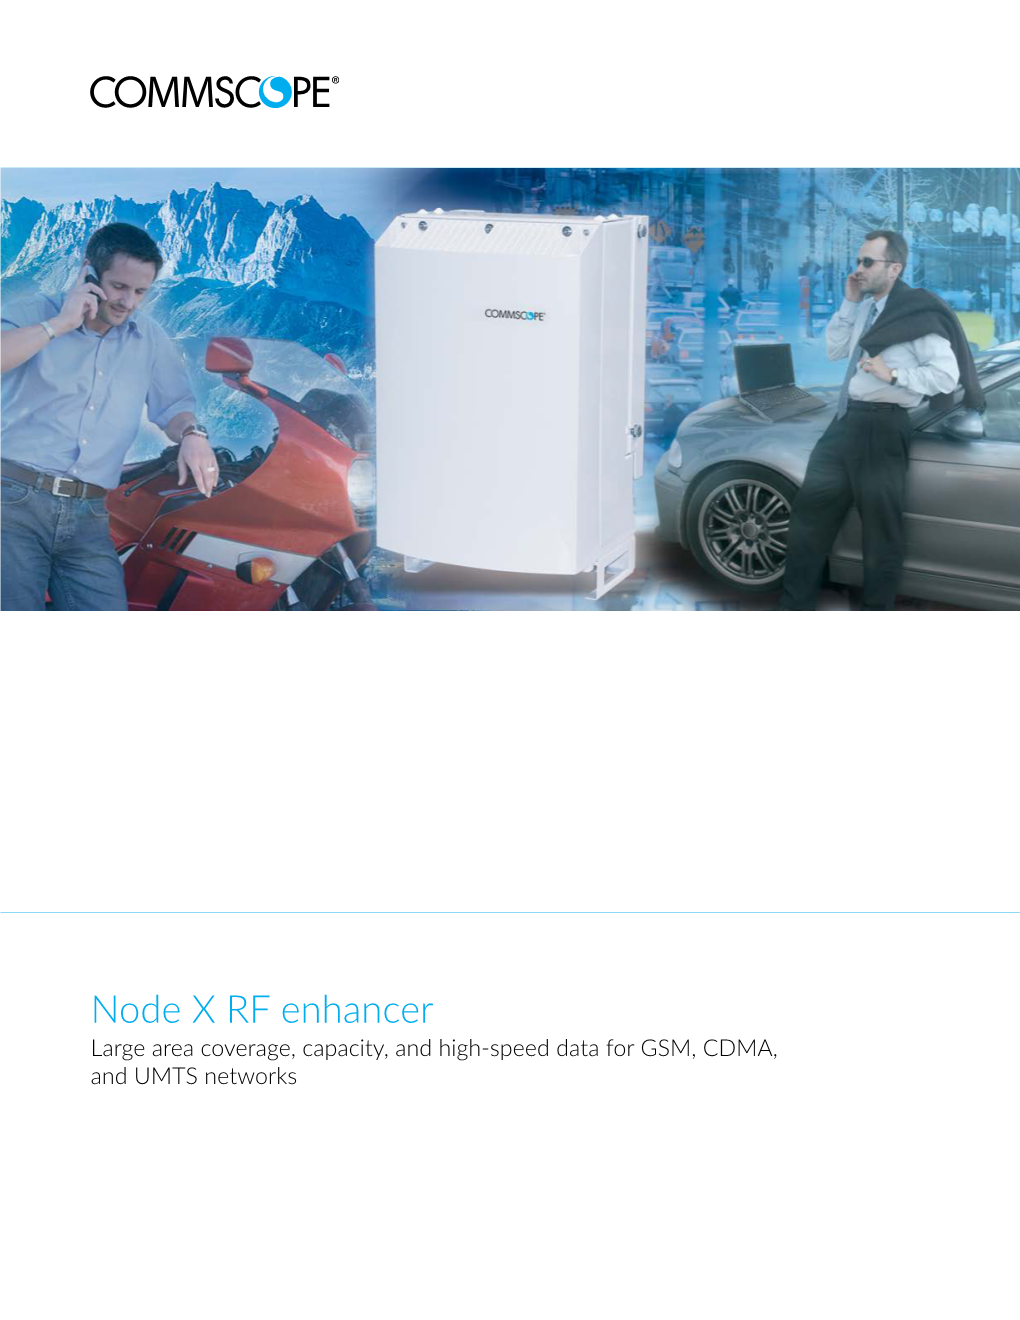 Node X RF Enhancer Large Area Coverage, Capacity, and High-Speed Data for GSM, CDMA, and UMTS Networks Node X—An Excellent Choice for Any Area